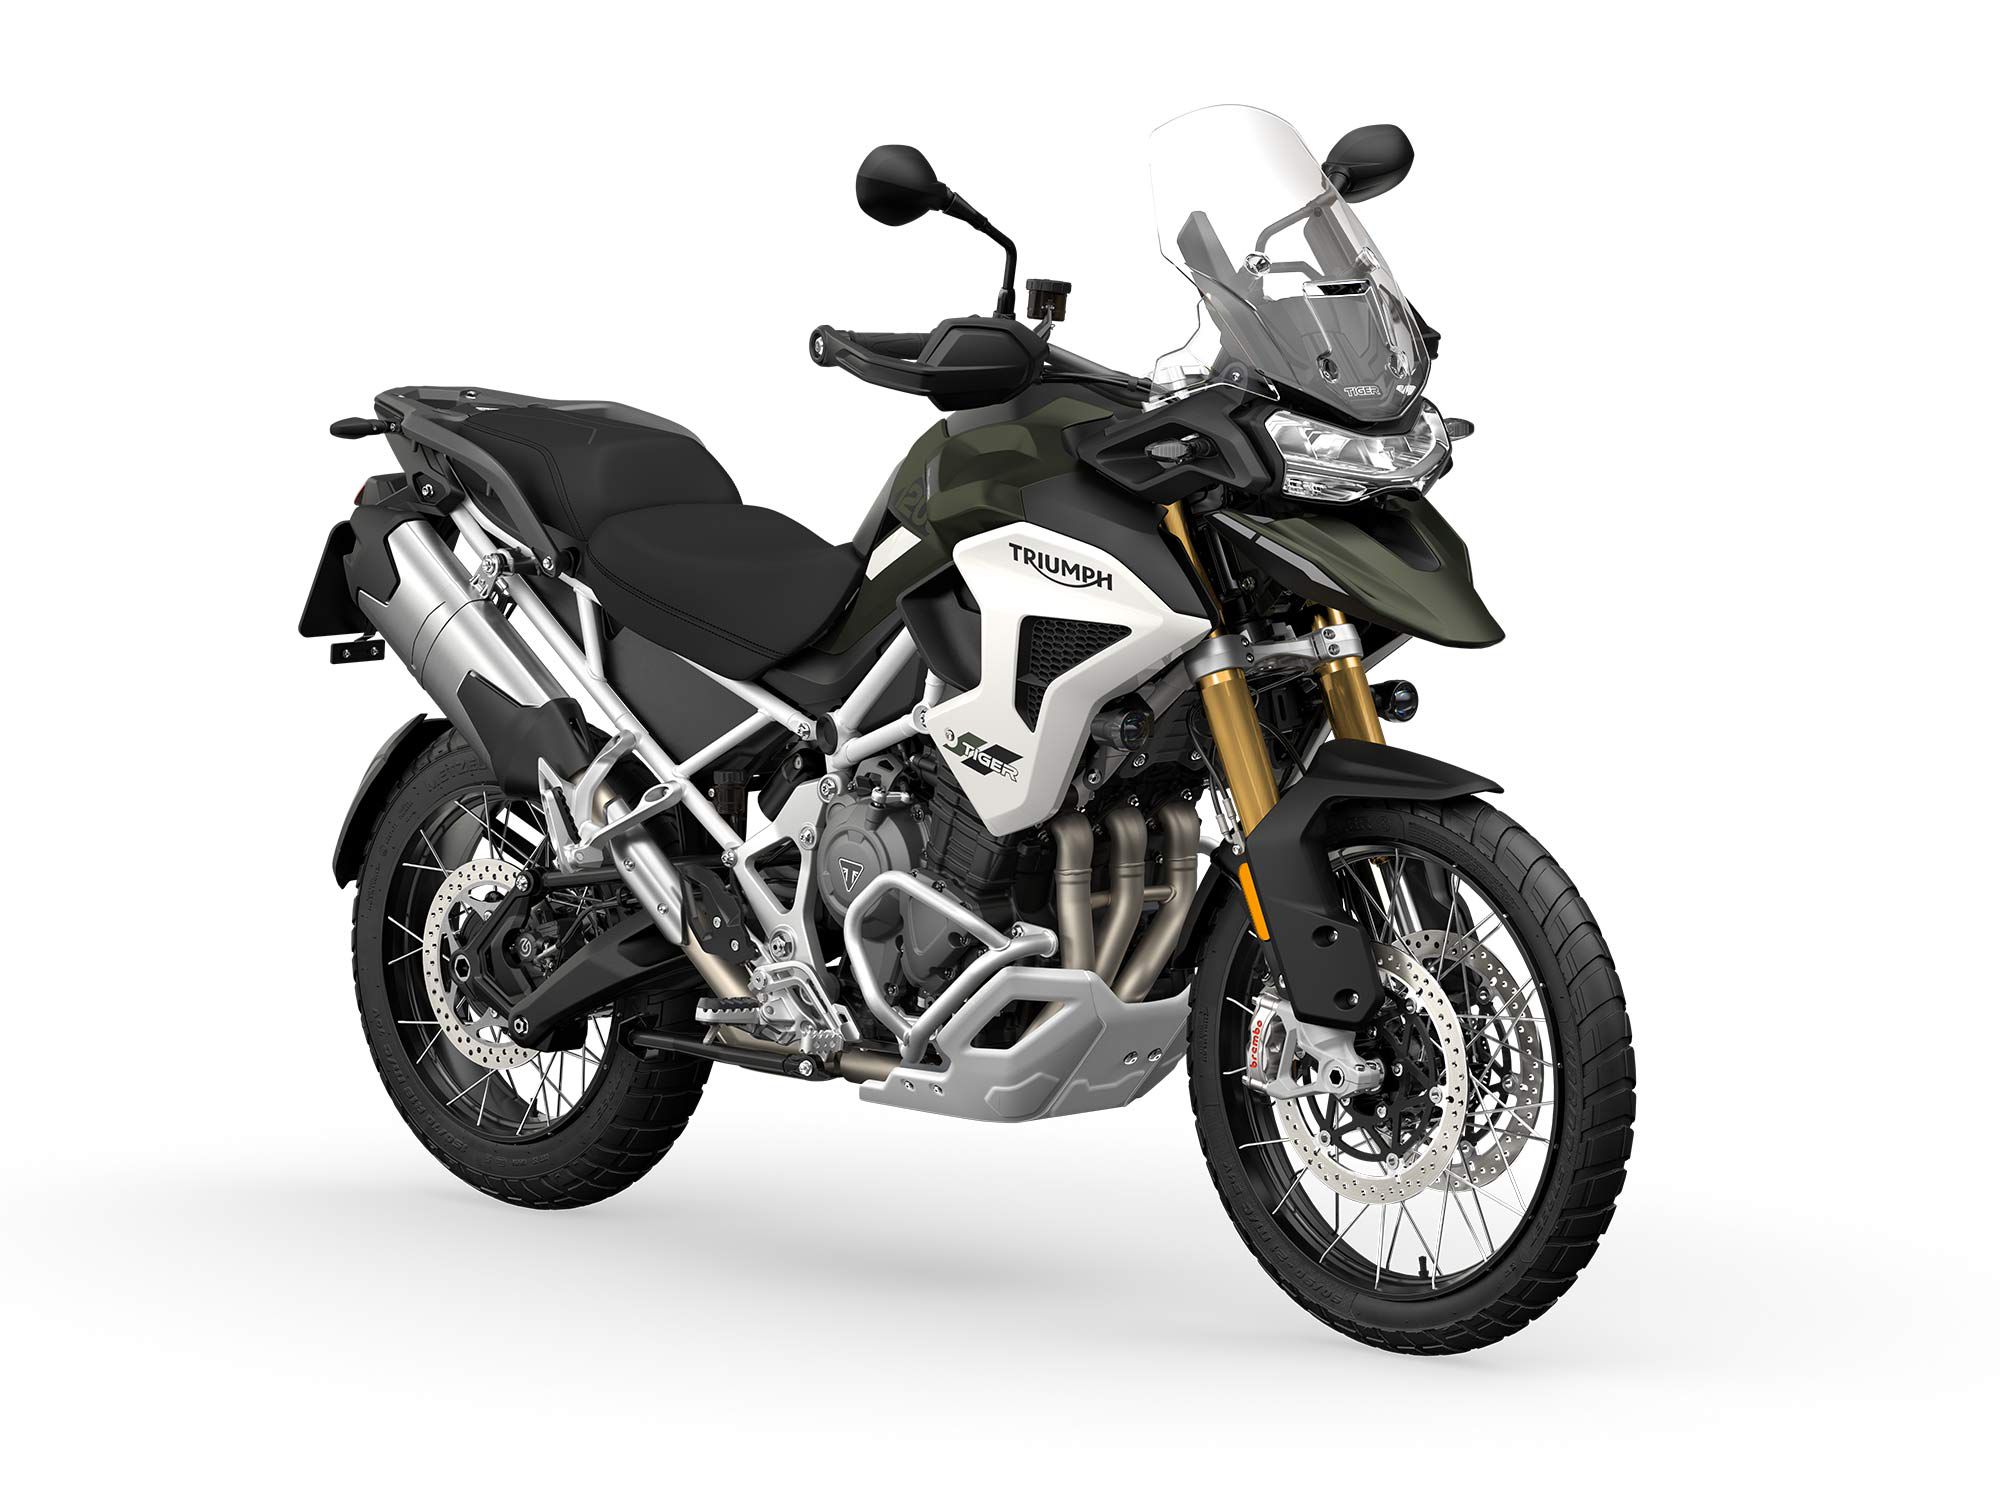 The 2022 Triumph Tiger 1200 Rally Pro will start at $22,500.